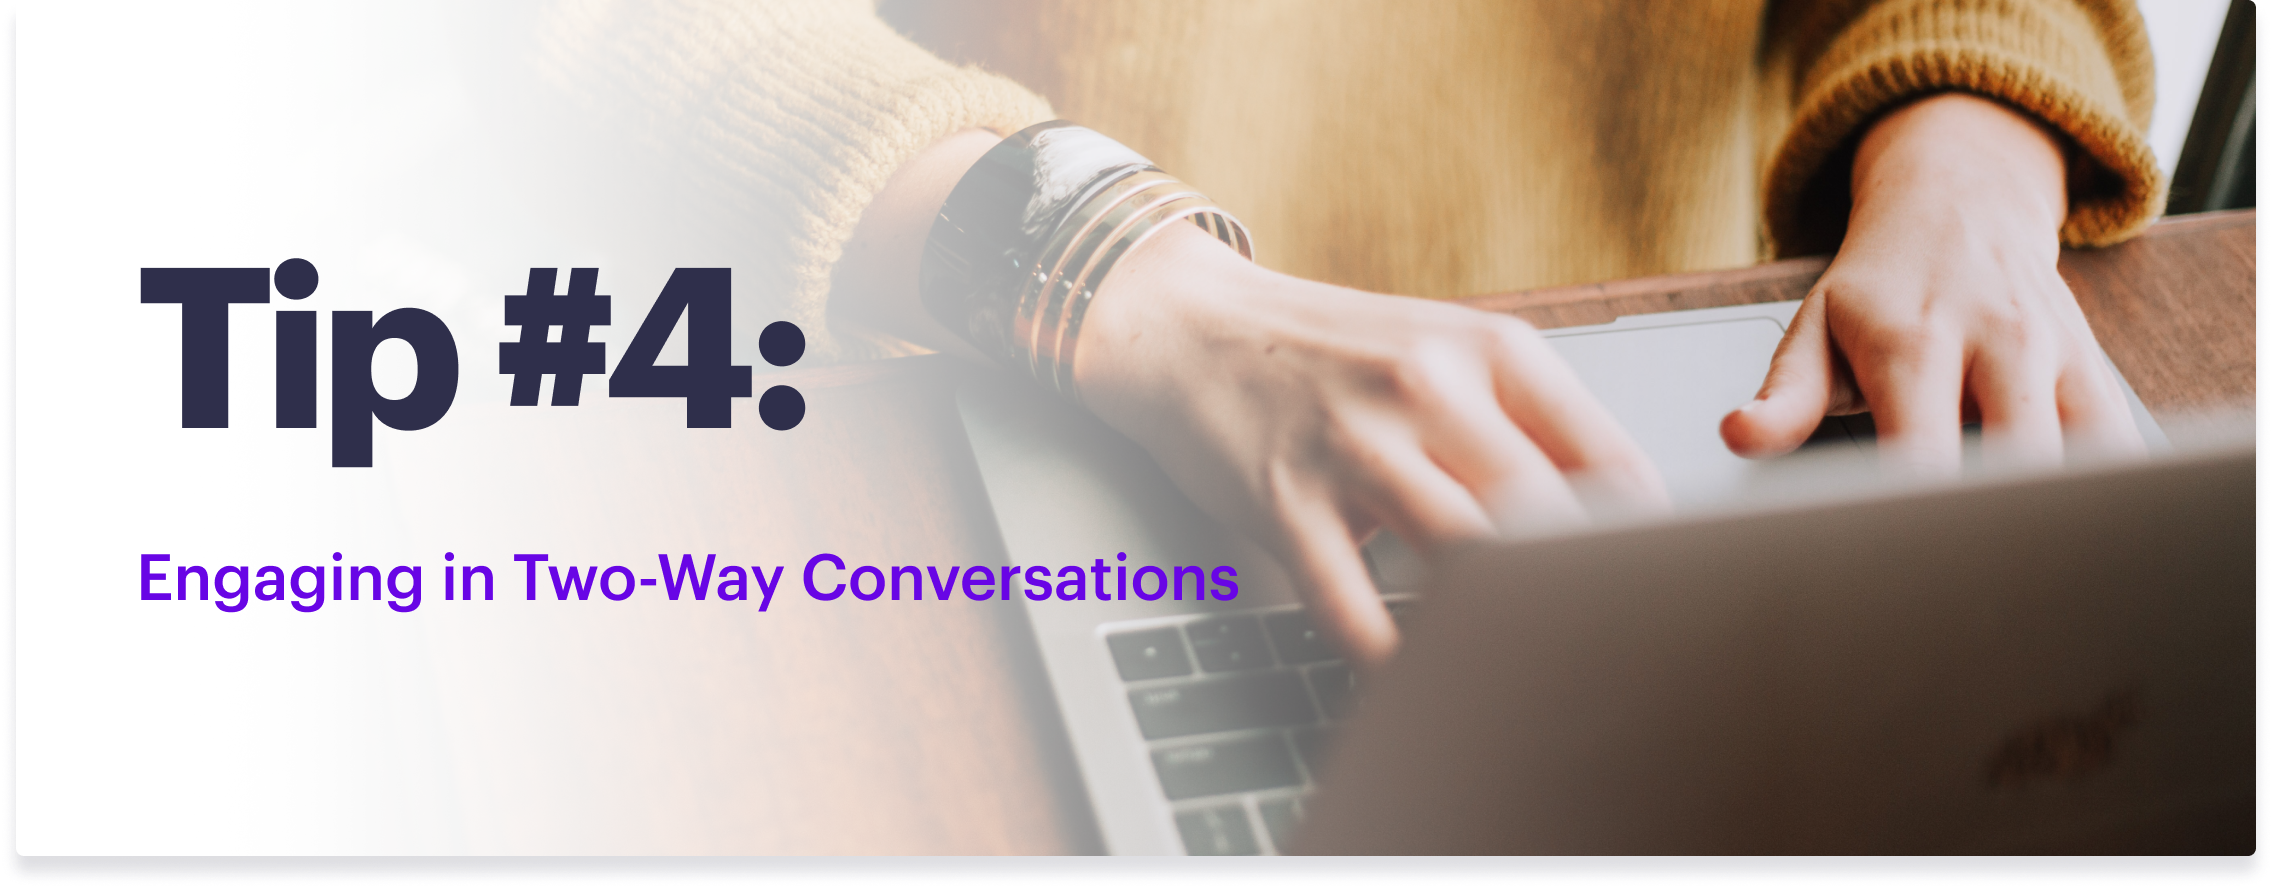 Tip #4: Engaging in Two-Way Conversations